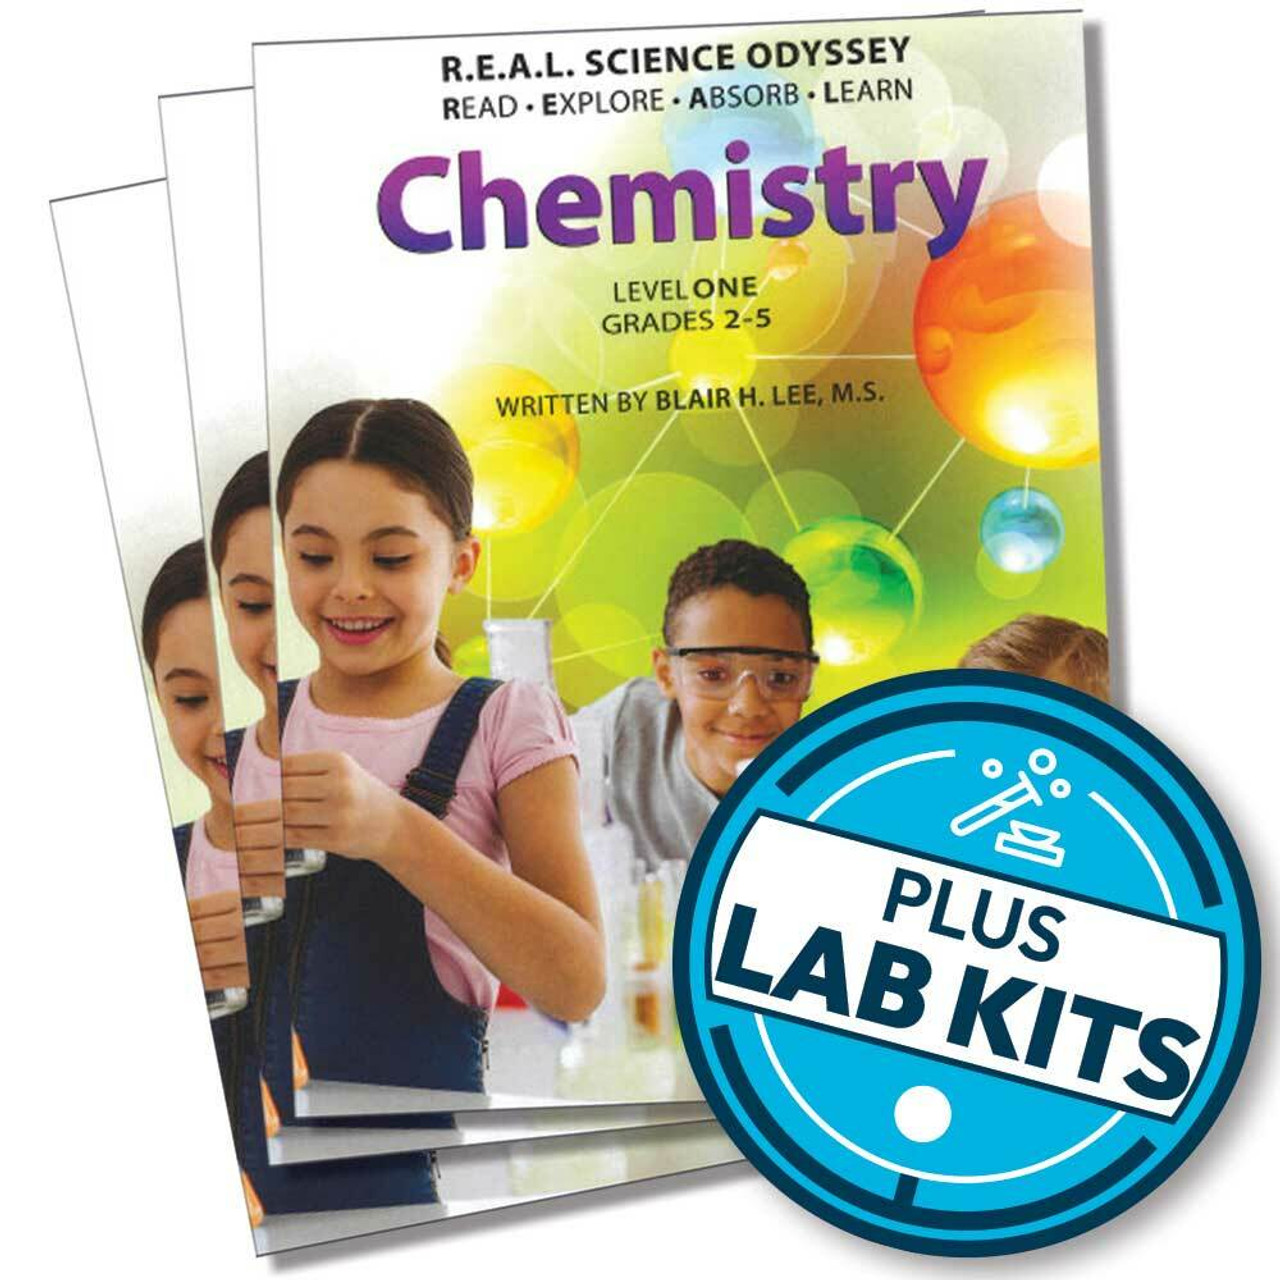 REAL Science Odyssey Chemistry Elementary